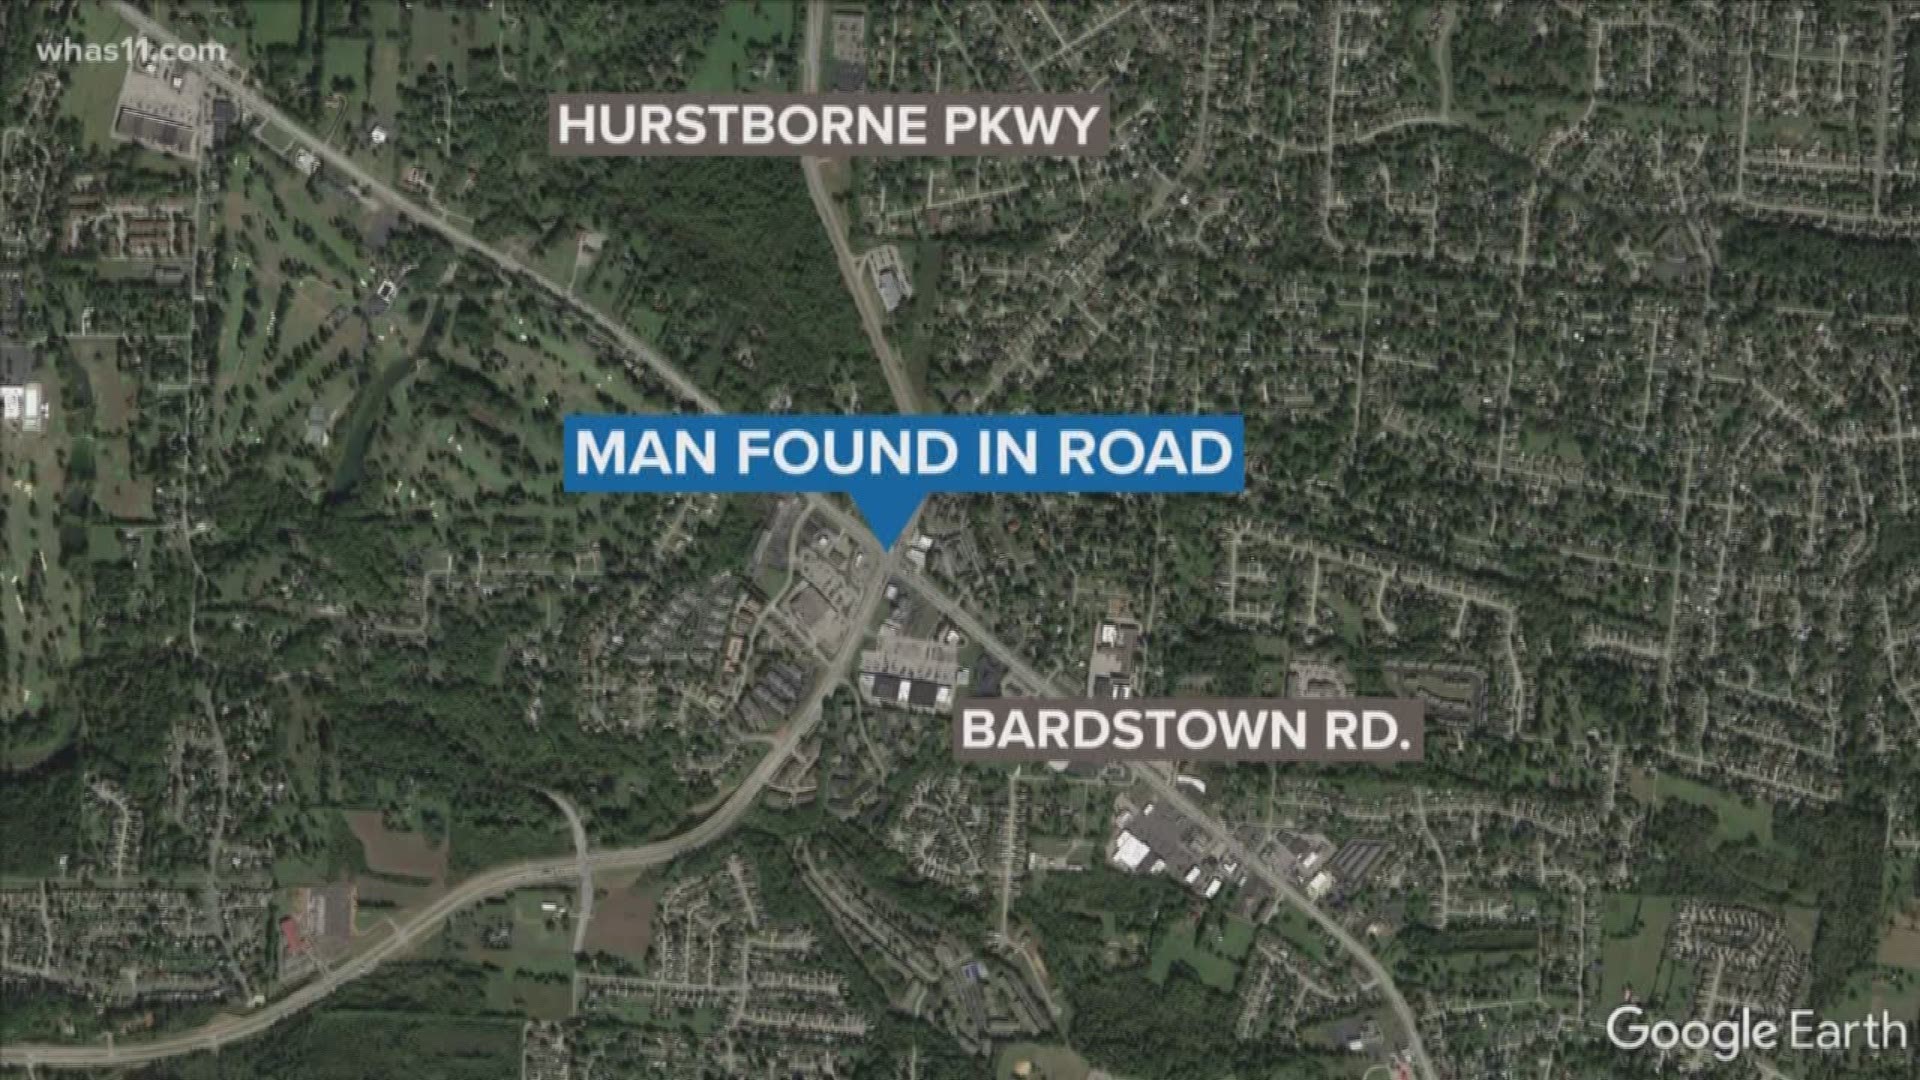 Police are looking for more information after they say a man was found on Bardstown Road, believed to have been pushed from a moving vehicle.